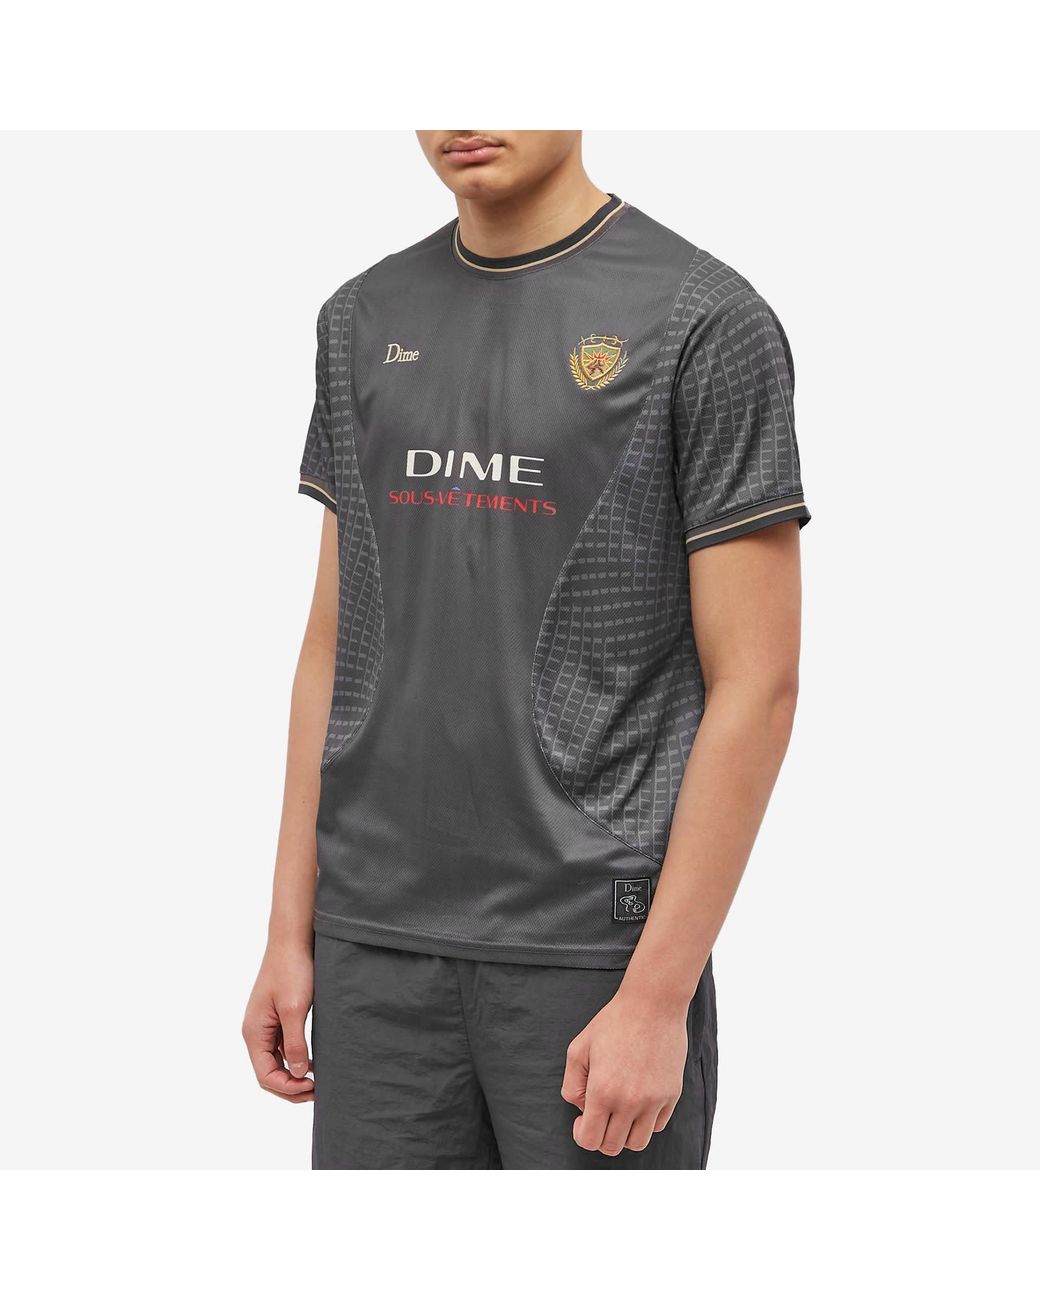 dime athletic jersey charcoal